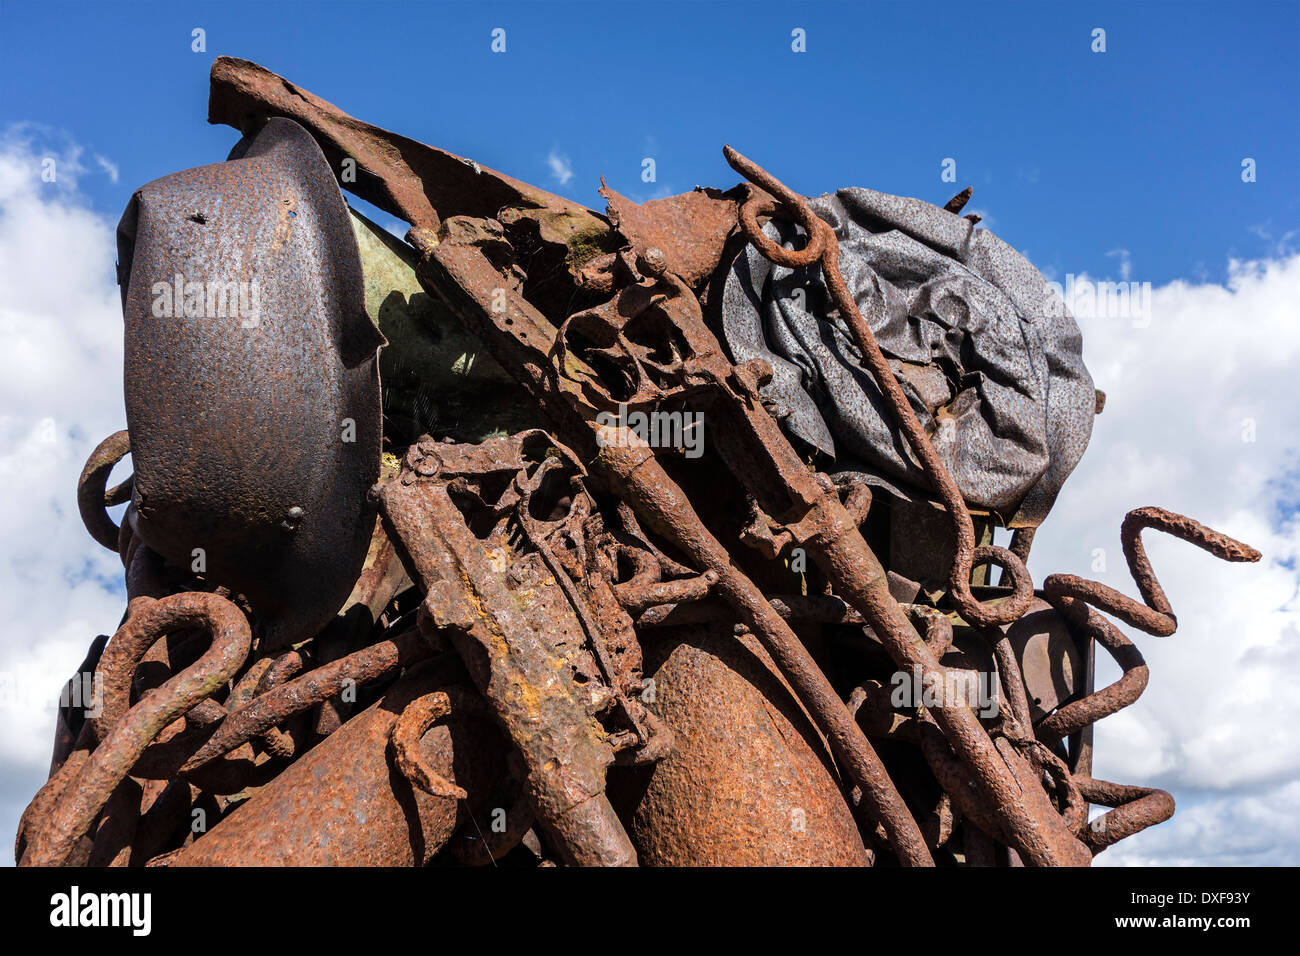 Compressed and twisted metal of WWI remnants like rifles, helmets near the IJzertoren / Yser Tower, Diksmuide / Dixmude, Belgium Stock Photo